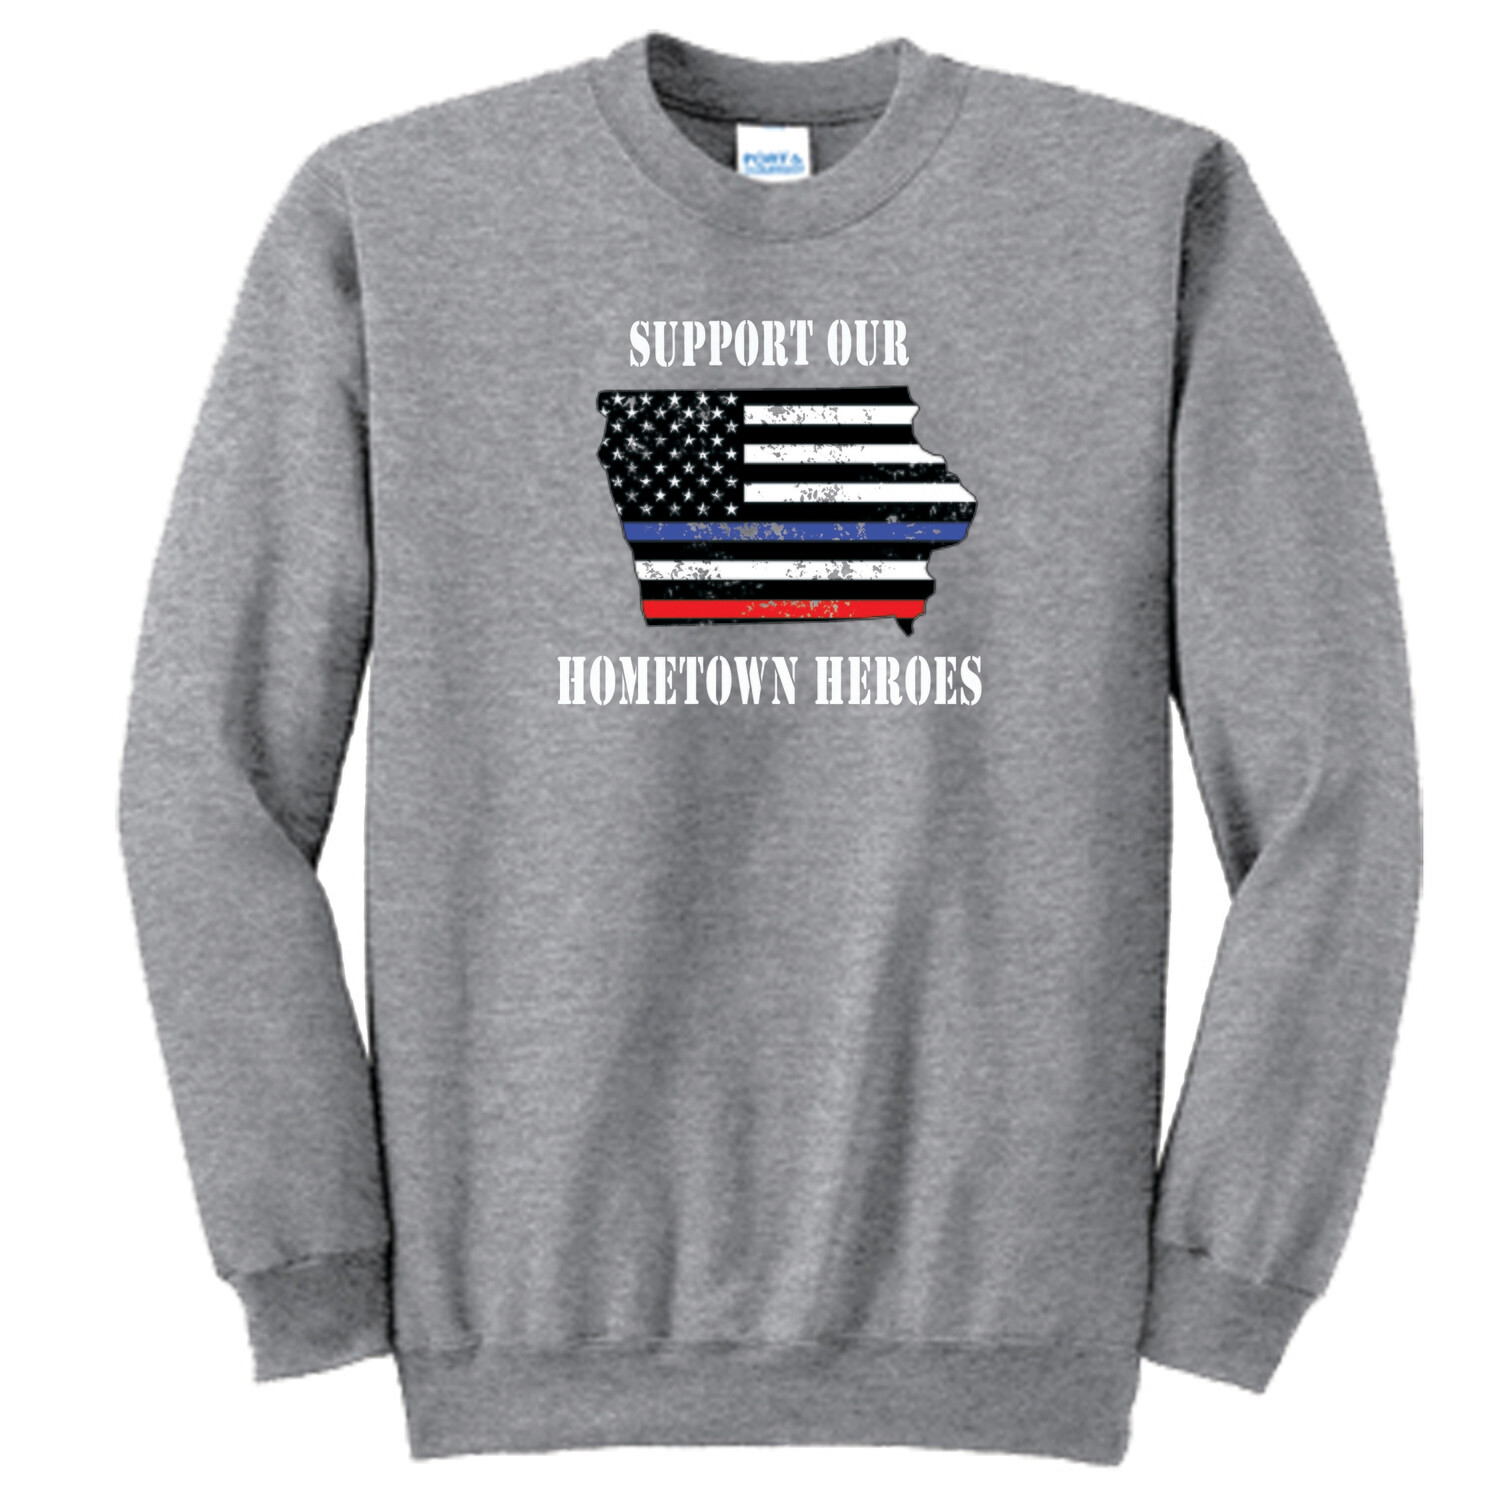 Crew neck Support our hometown heroes